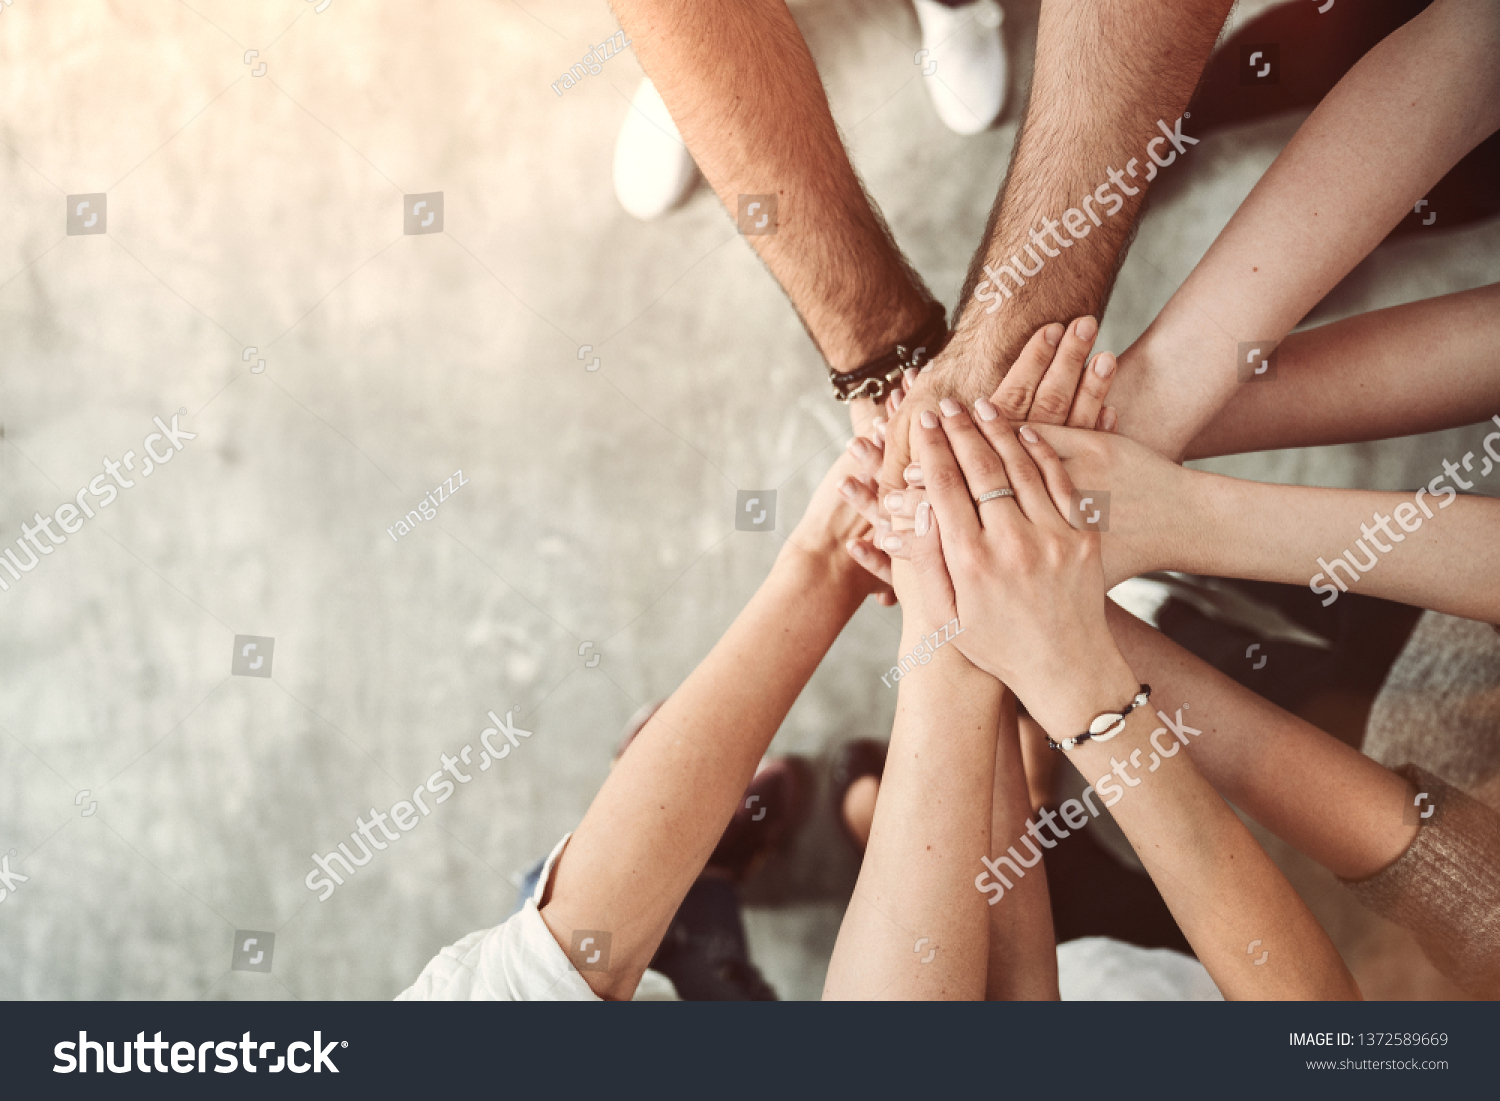 Teamwork, unity concept, group of friends put their hands together with copy space #1372589669